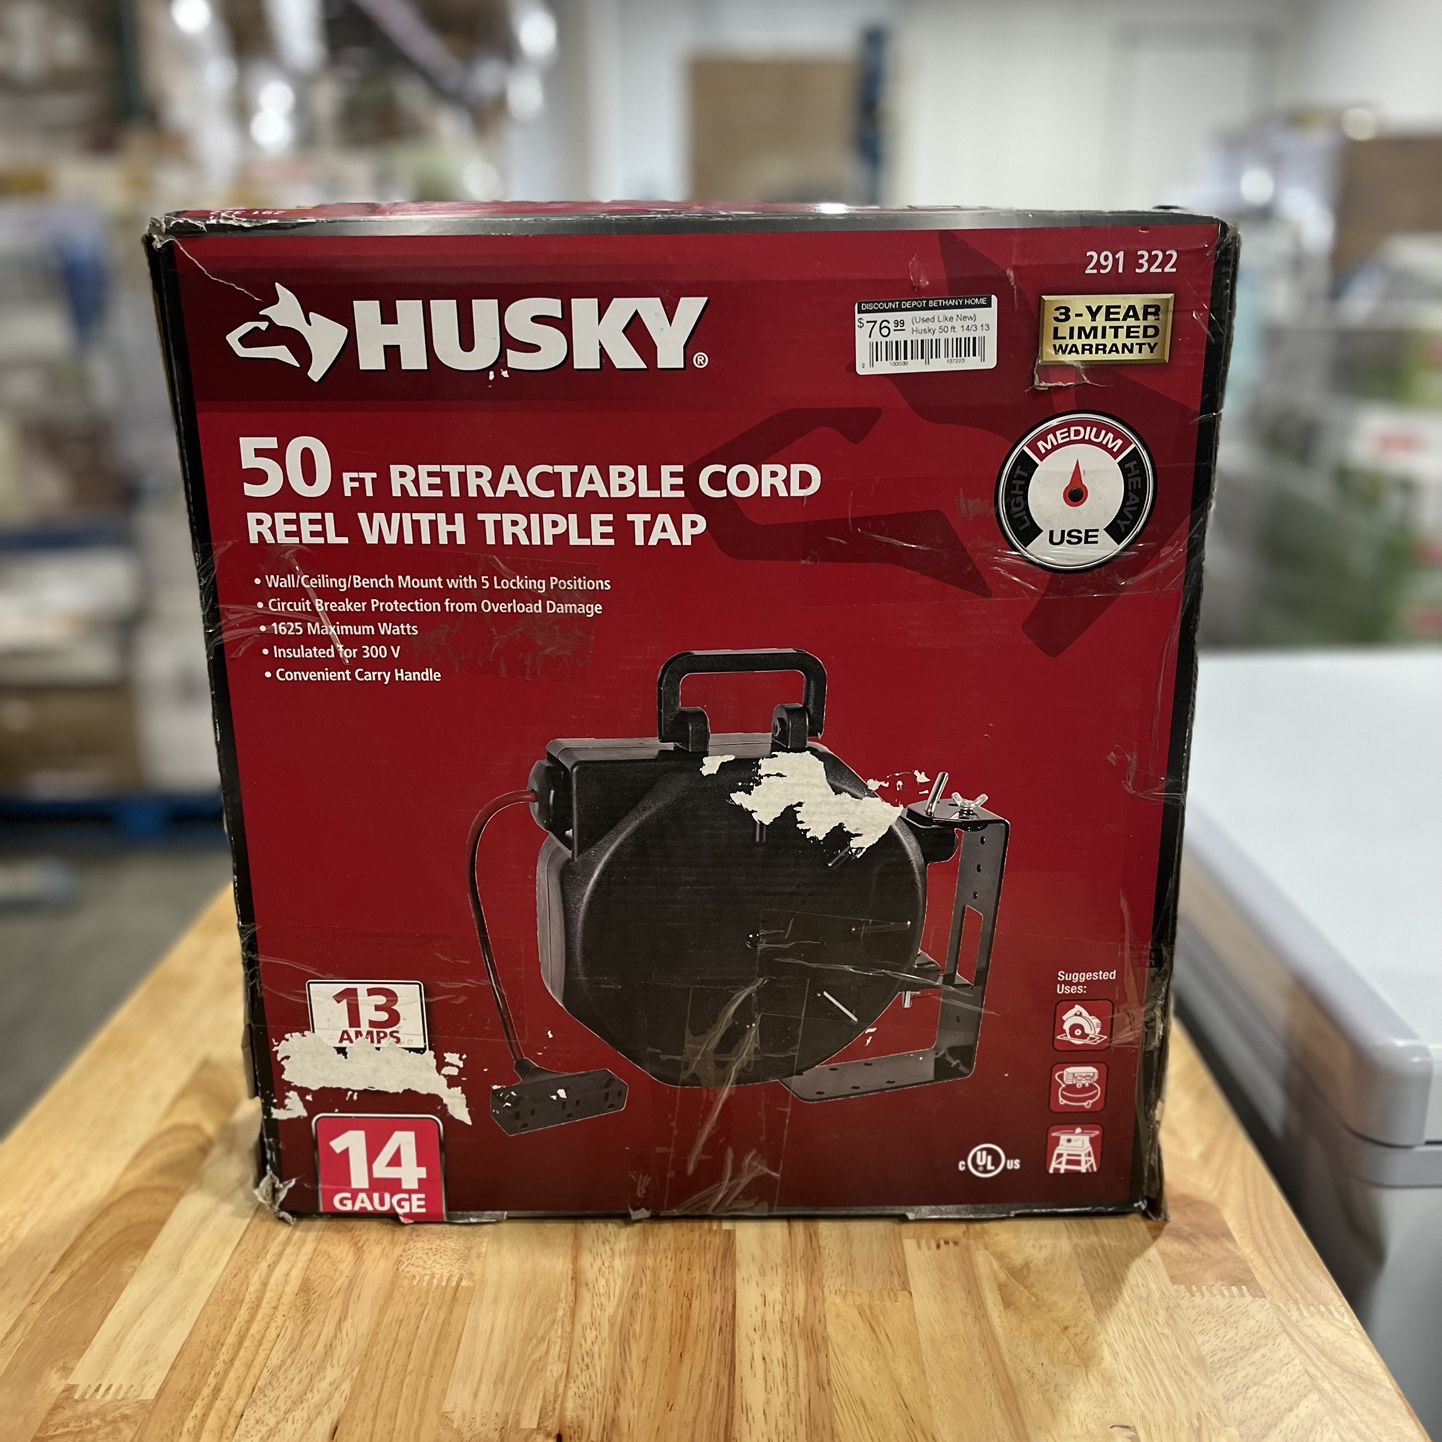 HUSKY 50 Ft Retractable Cord Reel With Triple Tap for Sale in